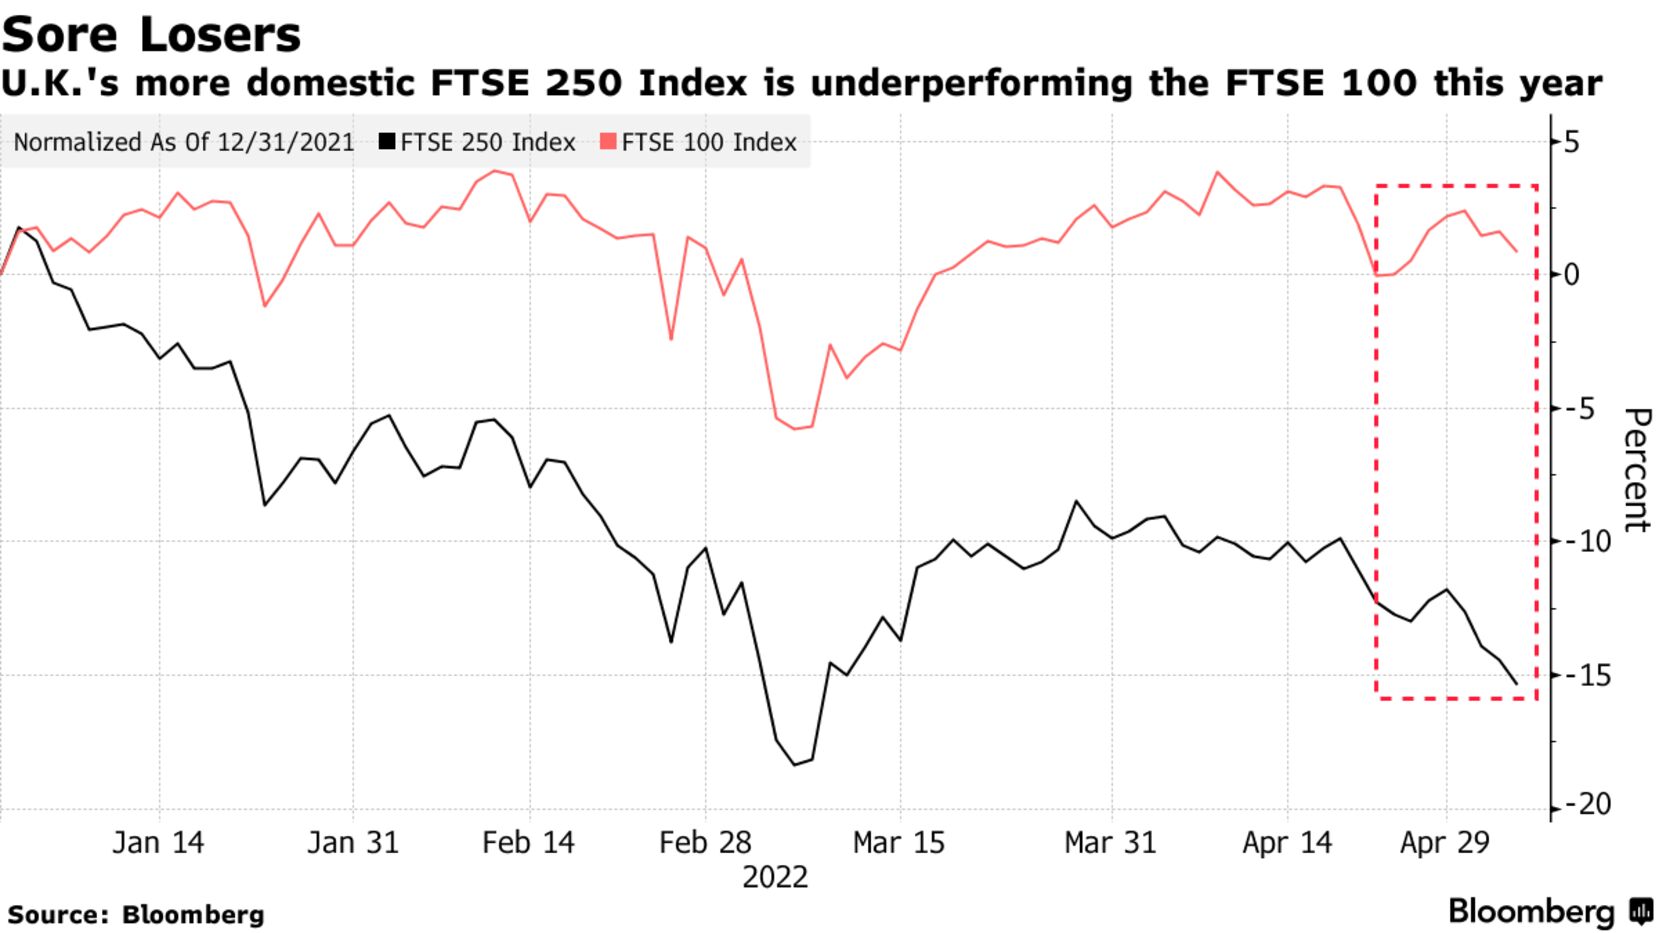 U.K.'s more domestic FTSE 250 Index is underperforming the FTSE 100 this year